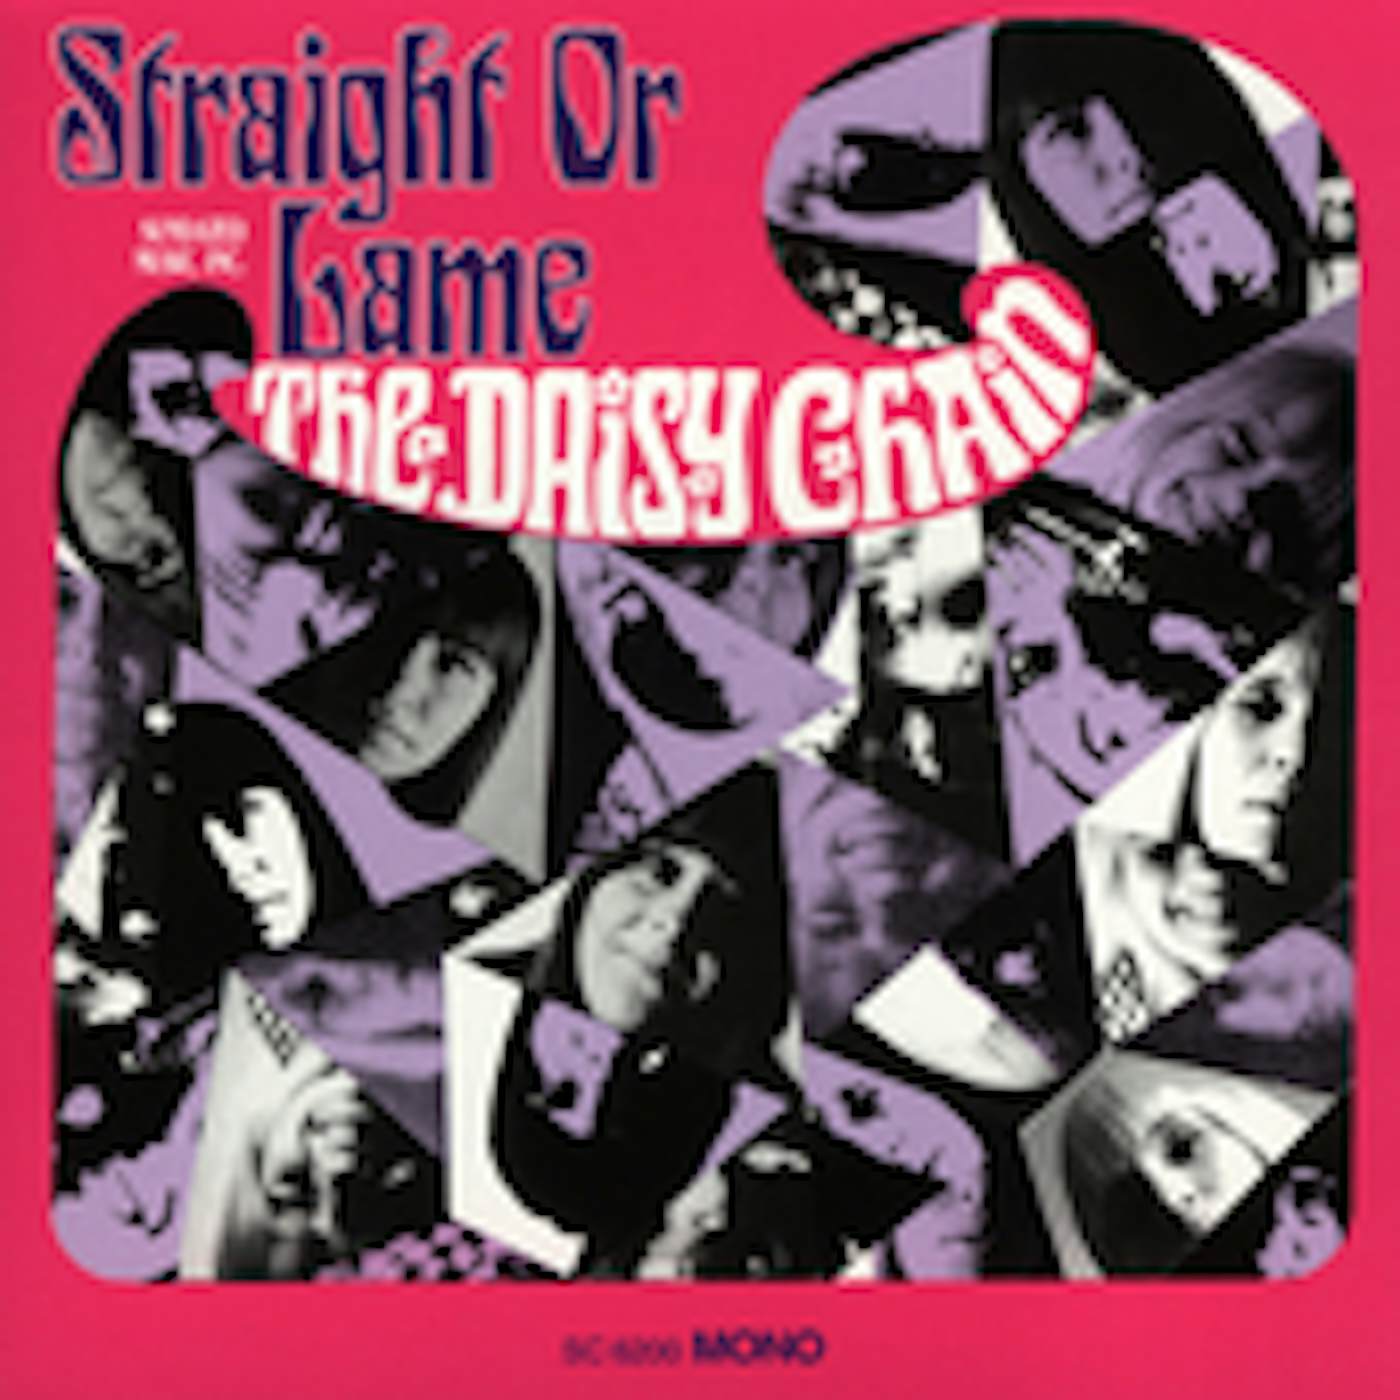 Daisy Chain STRAIGHT OR LAME CD